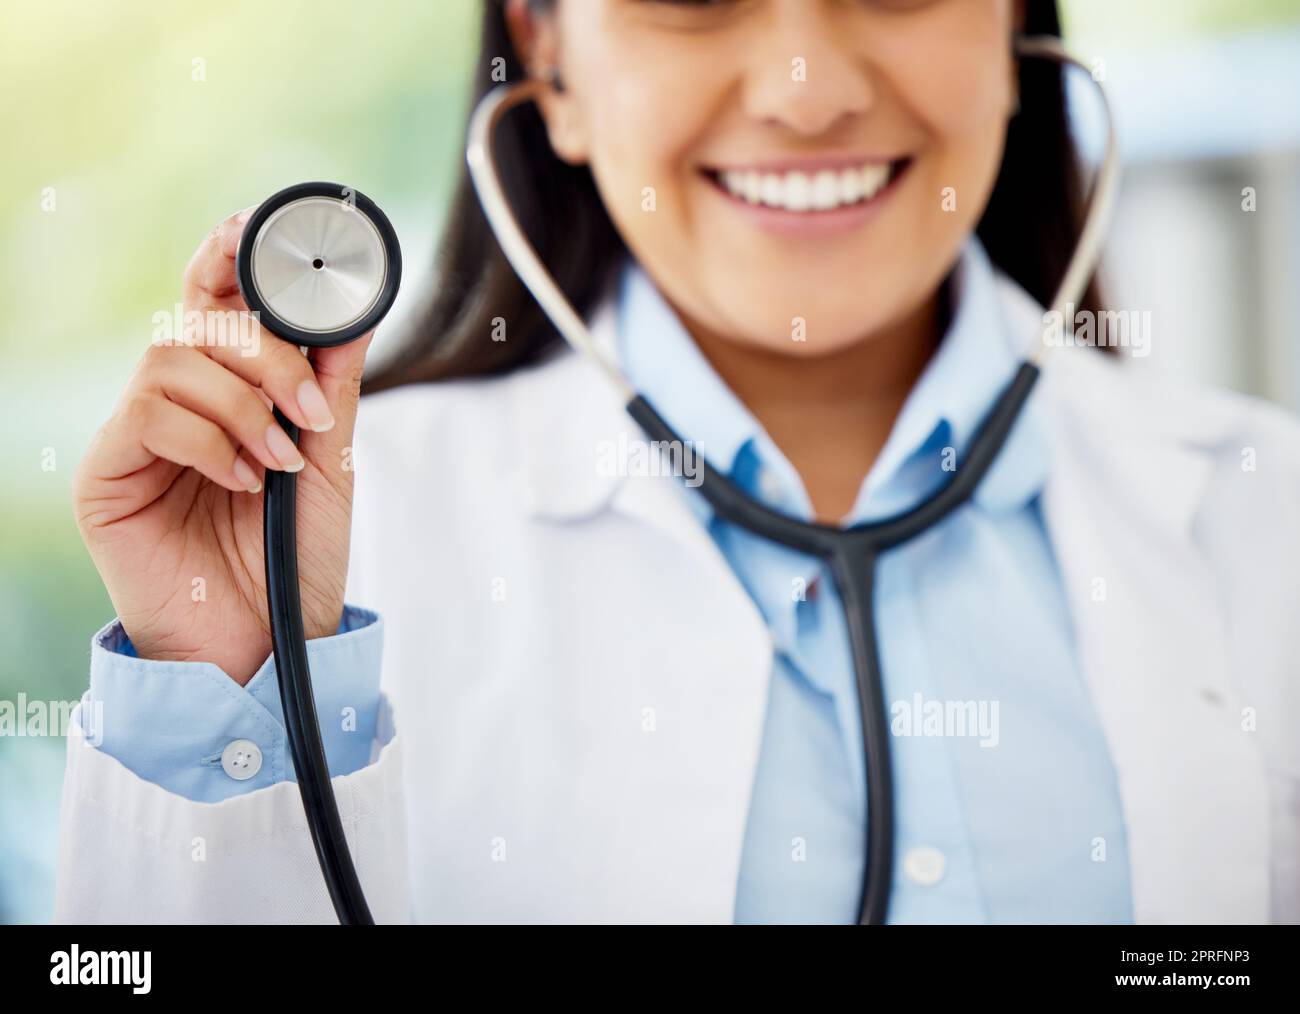 Healthcare, medicare and hospital planning by doctor holding stethoscope, excited to help, diagnose and cure disease. Health care professional happy and ready for medical appointment or consultation Stock Photo